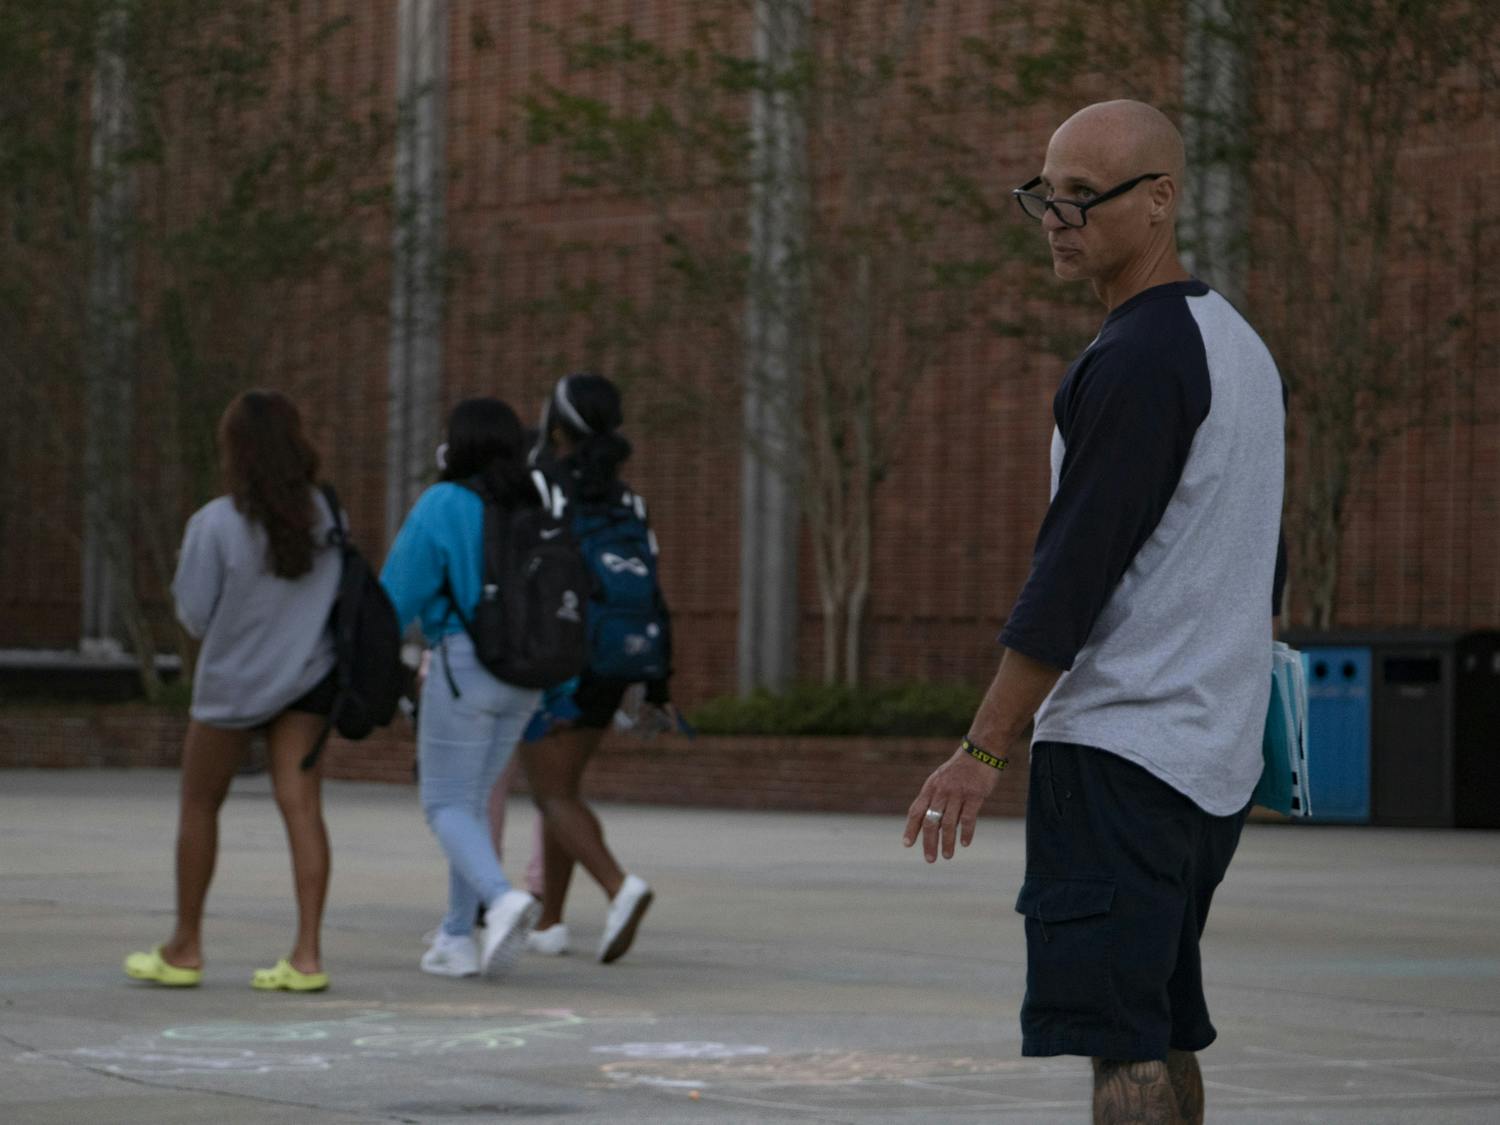 A petitioner looks for people to sign the blue petition outside the Reitz Union on Thursday, Oct. 28, 2021. "This is a good cause," he said. "The Seminoles are getting jerked around by the government." He warned that the green petition is not a good one.